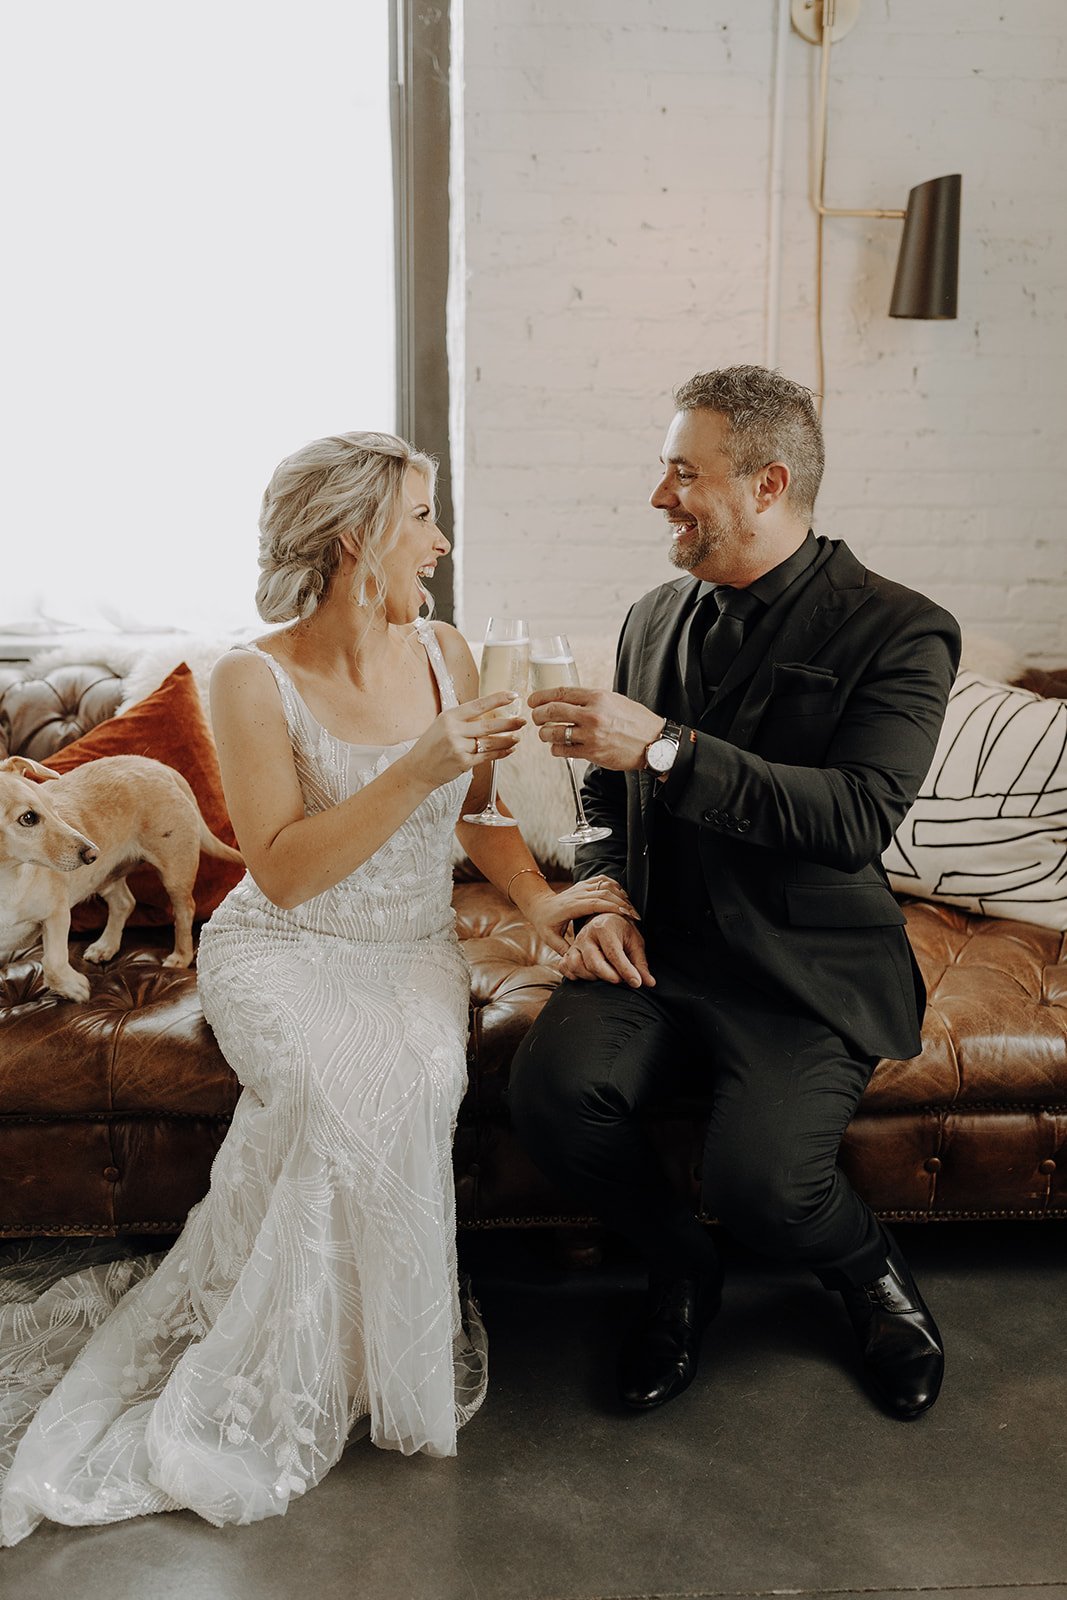 Bride and groom cheers with champagne after wedding ceremony at Company 251